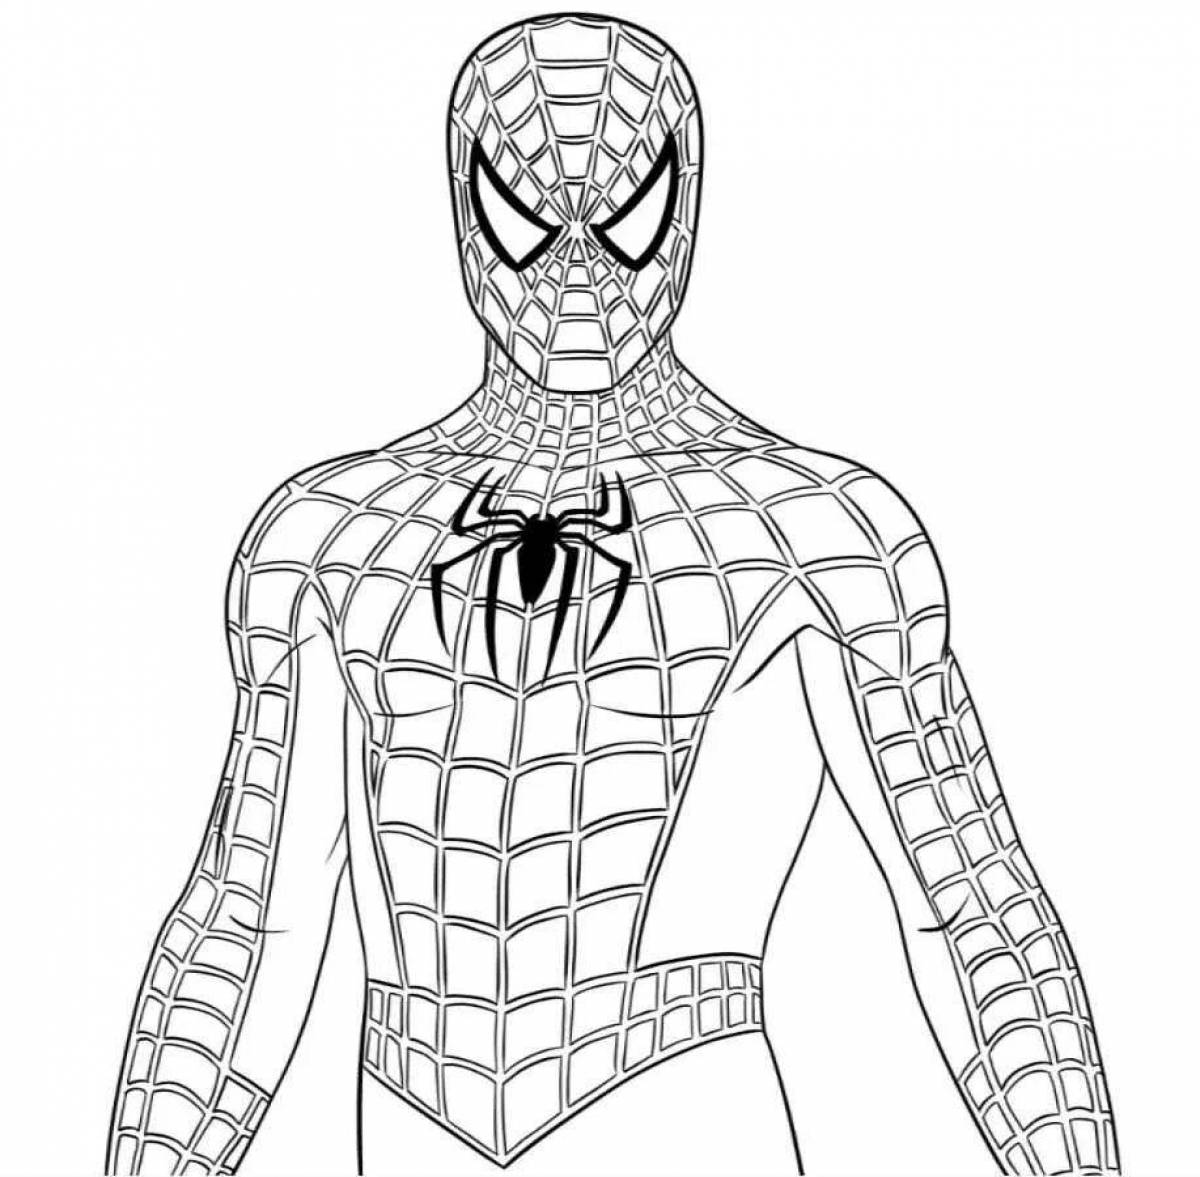 Gorgeous Spider-man coloring book for kids